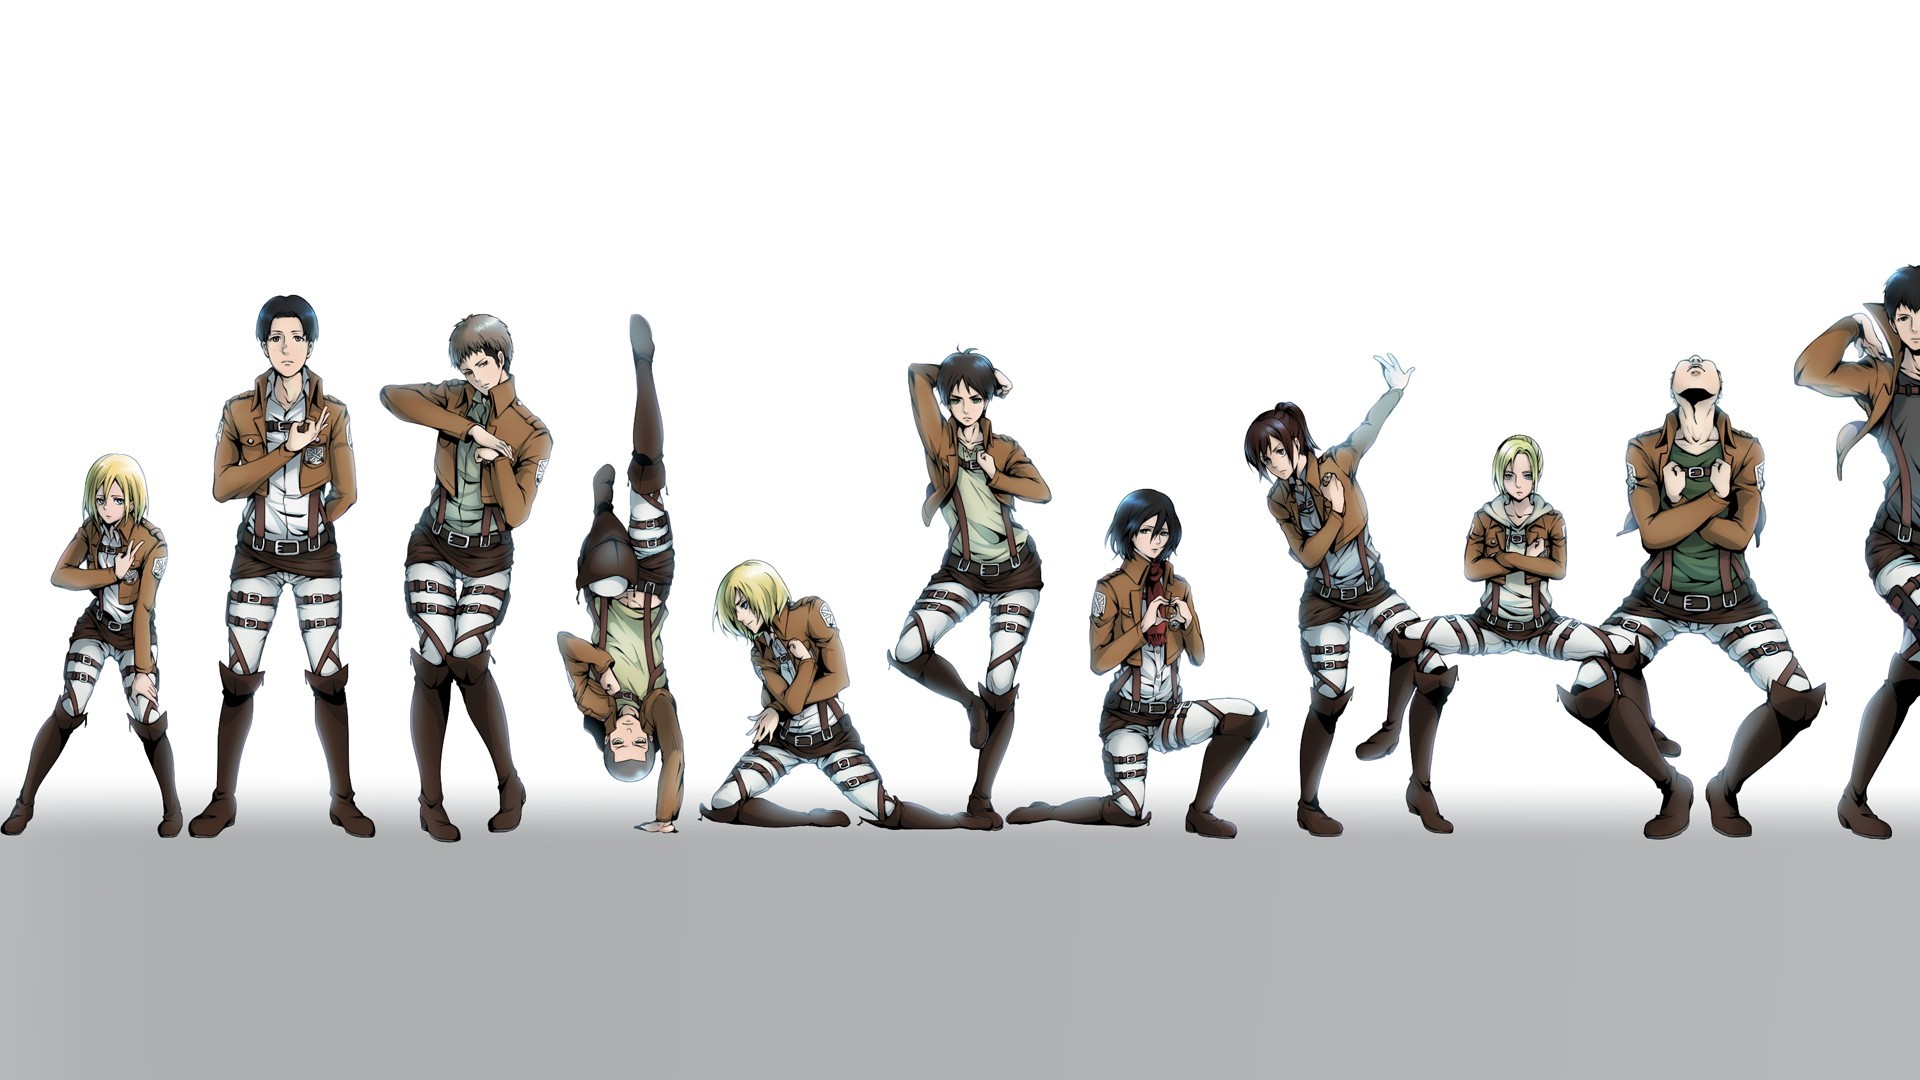 1920x1080 165 Annie Leonhart HD Wallpapers | Backgrounds - Wallpaper Abyss - Page 2